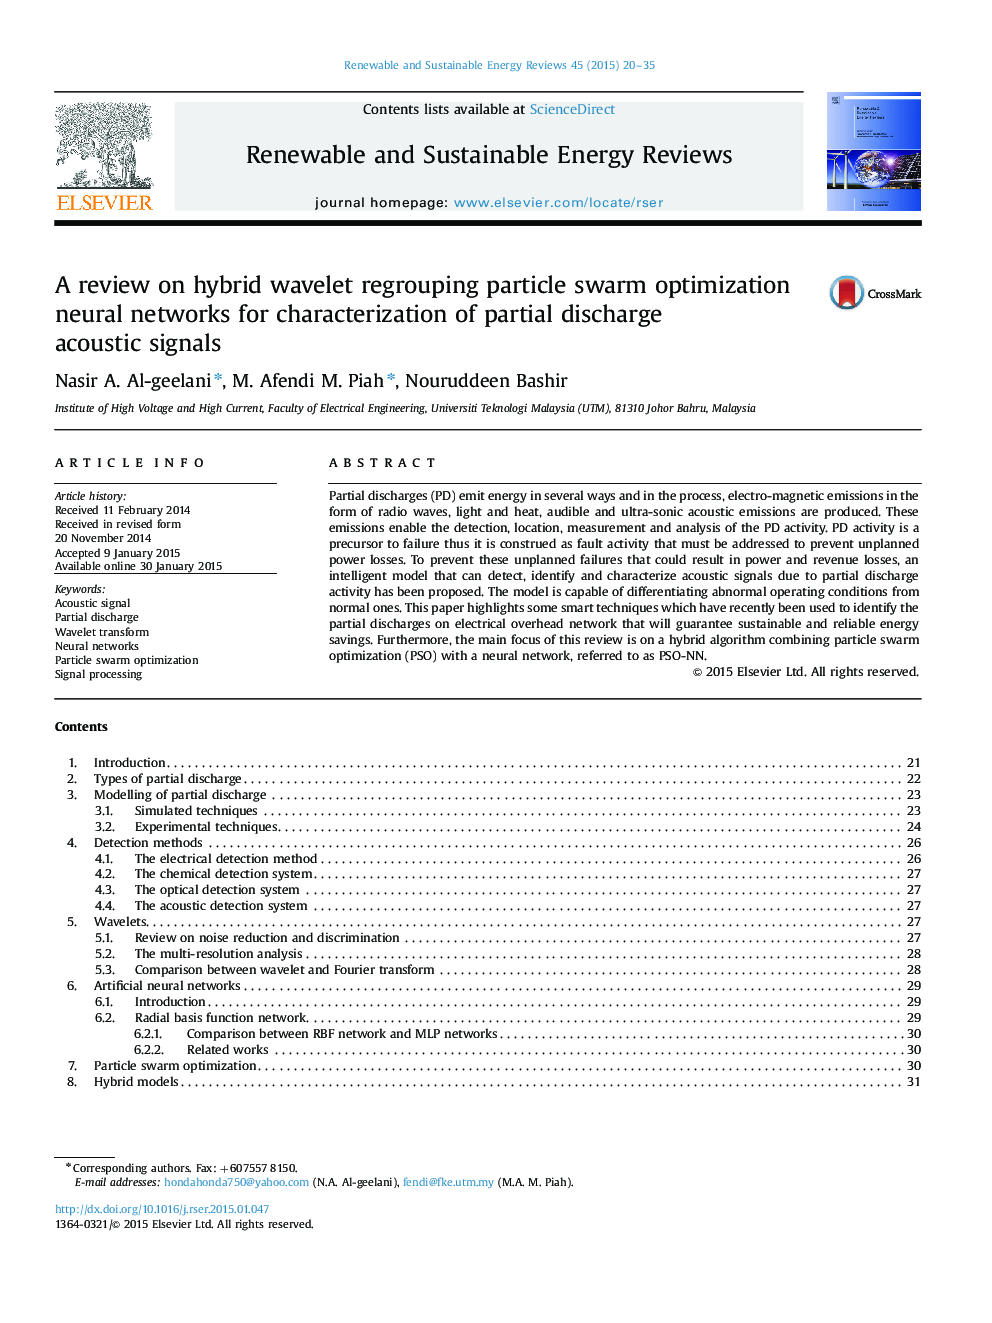 A review on hybrid wavelet regrouping particle swarm optimization neural networks for characterization of partial discharge acoustic signals